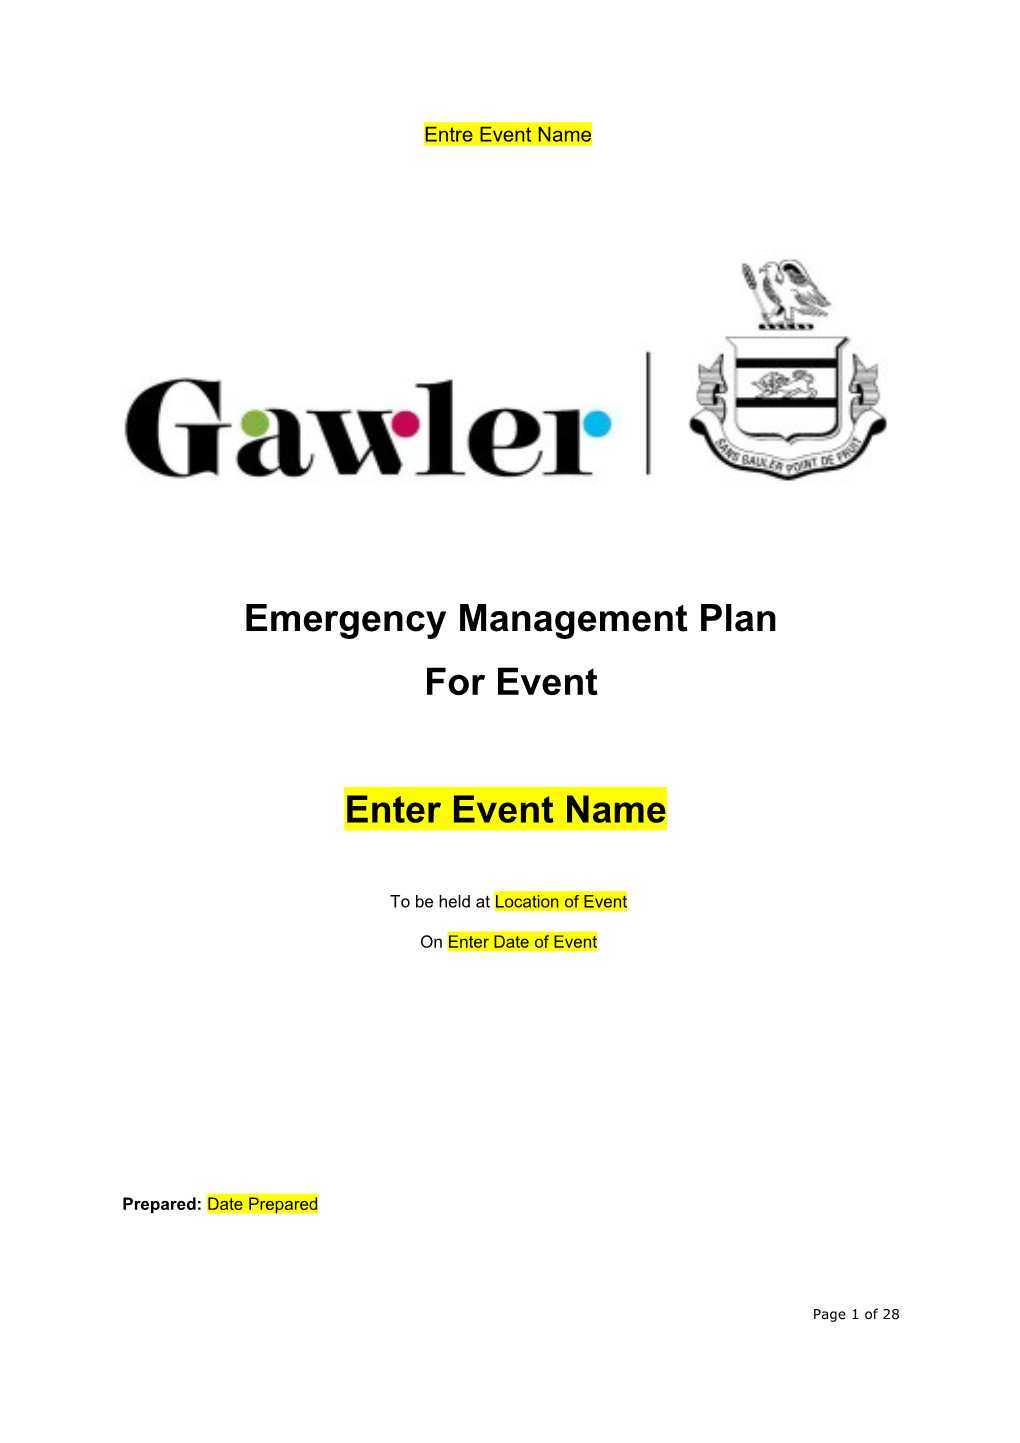 Emergency Management & Recovery Plan